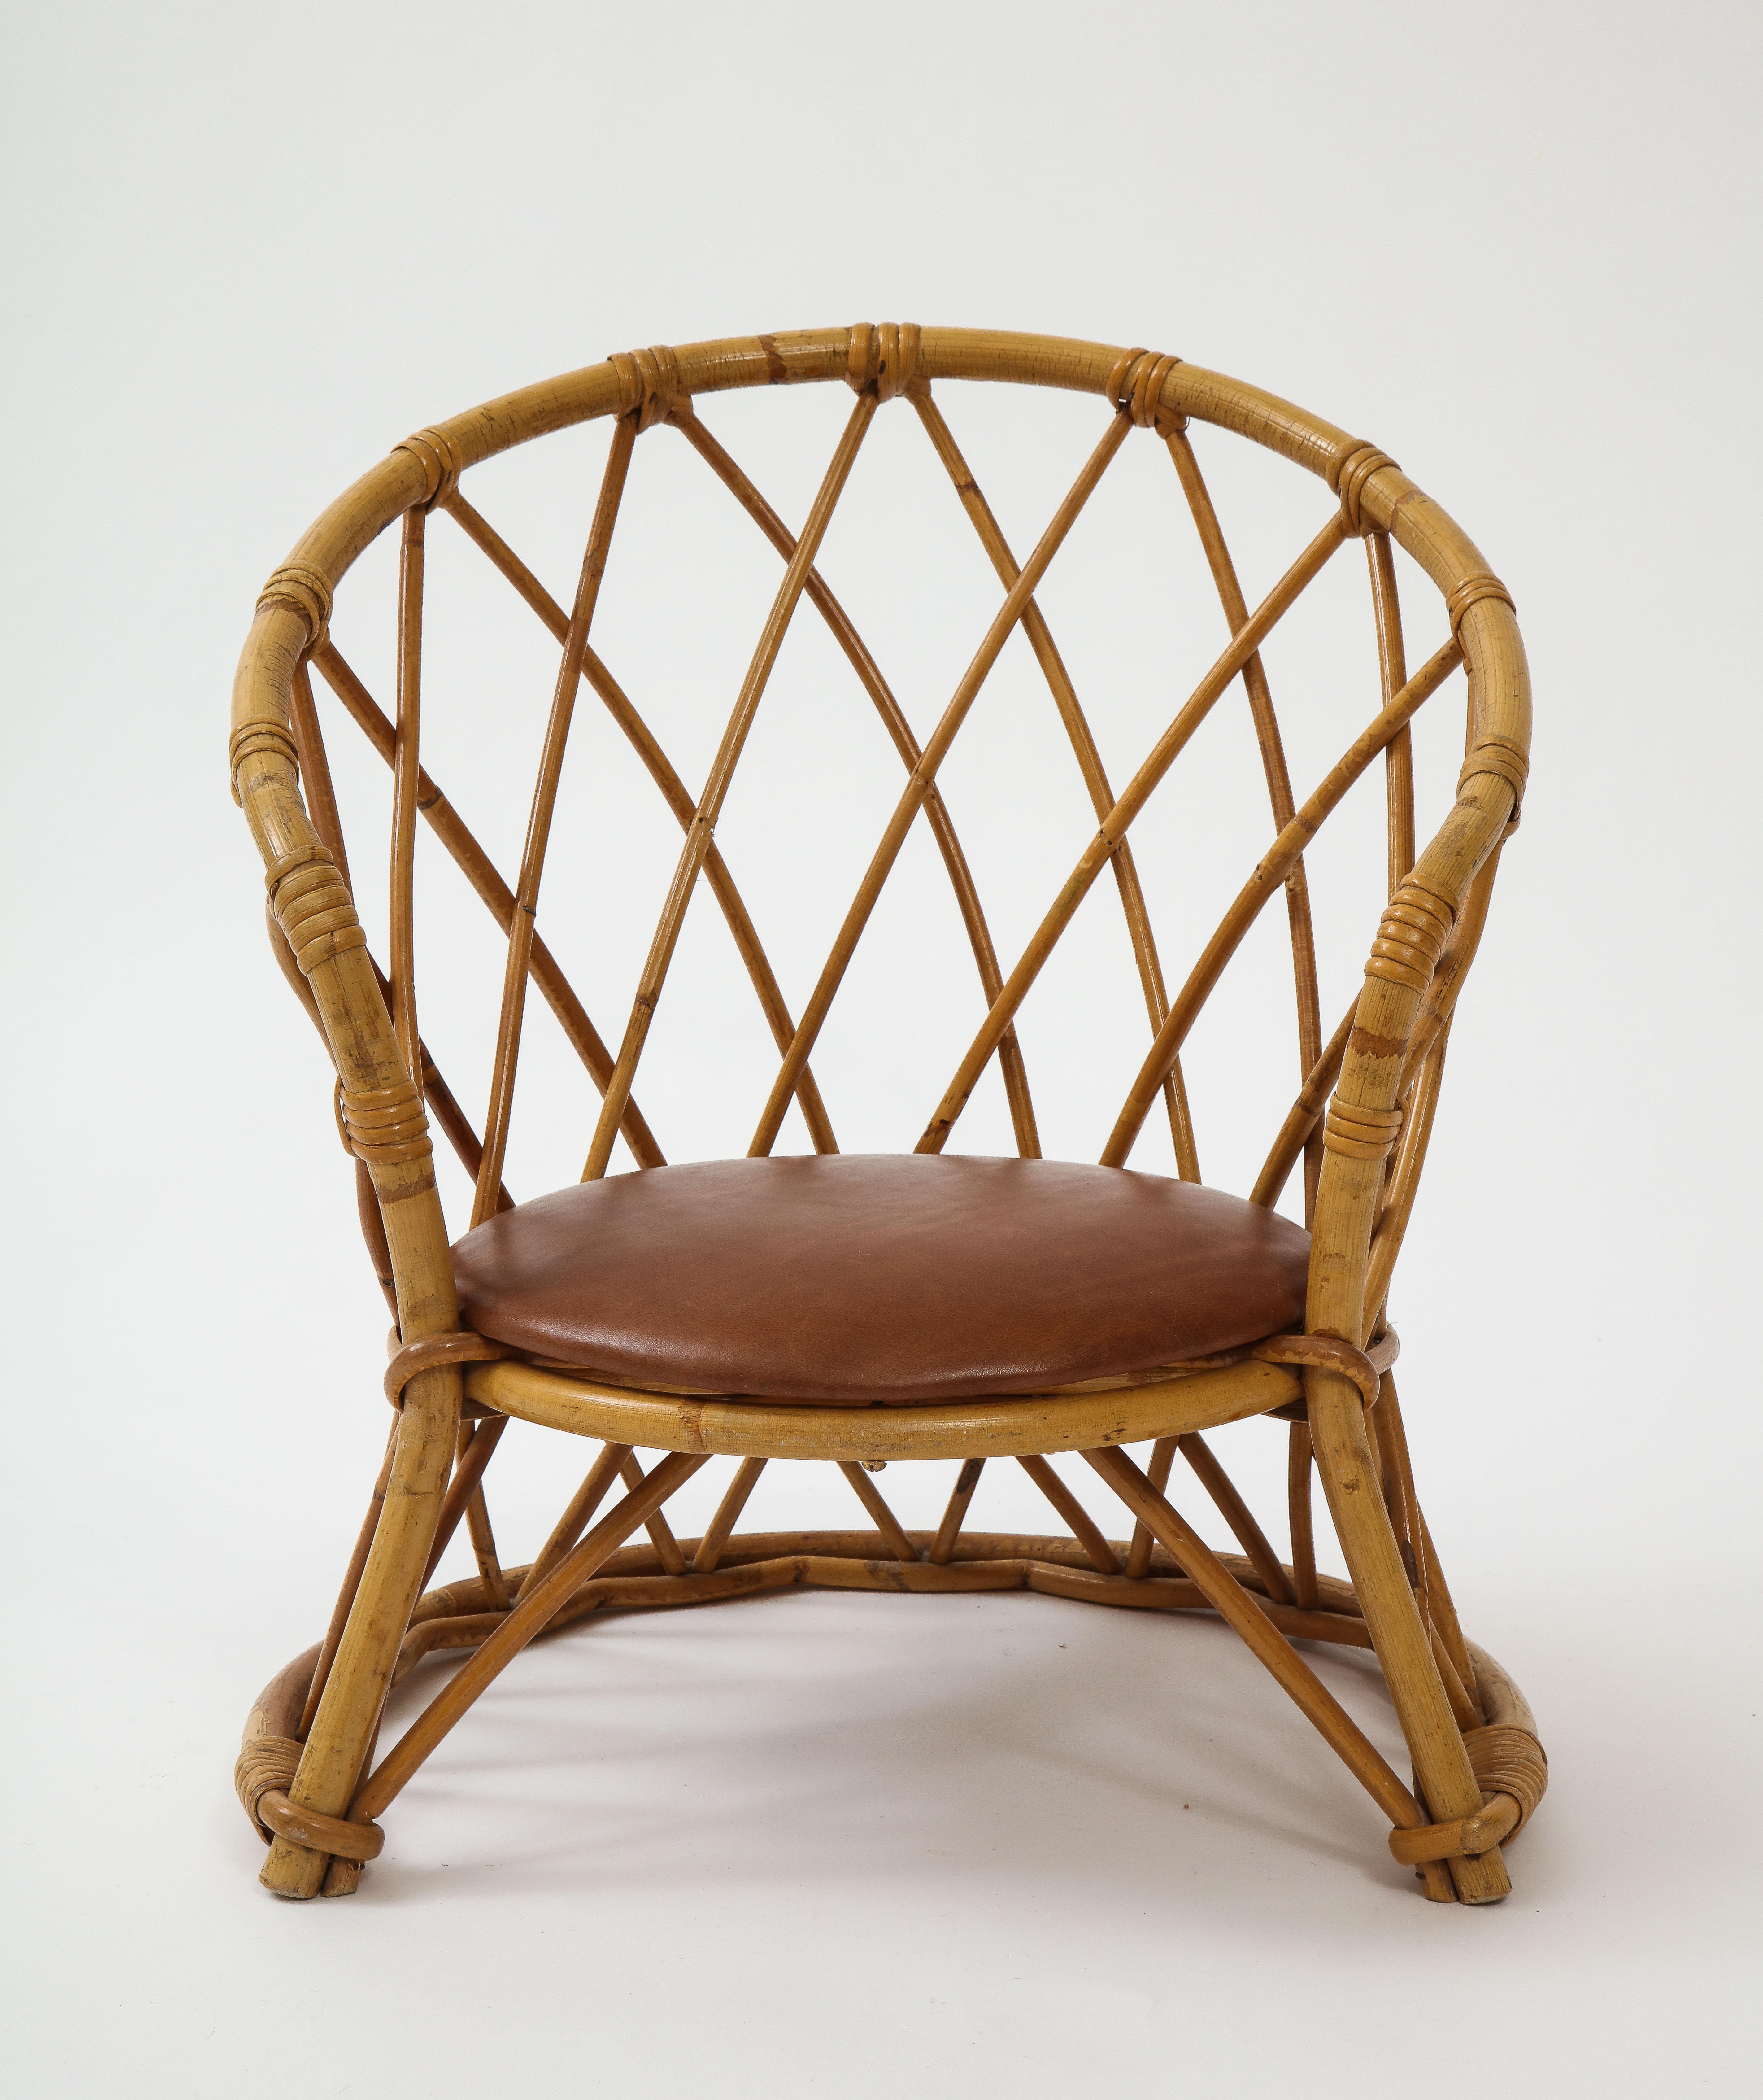 Childrens rattan chair with brown leather seat, 1950s, France.

Super chic children's chair, to be placed anywhere the kids hang out so they can have their own space. Lovely condition, new leather seat.